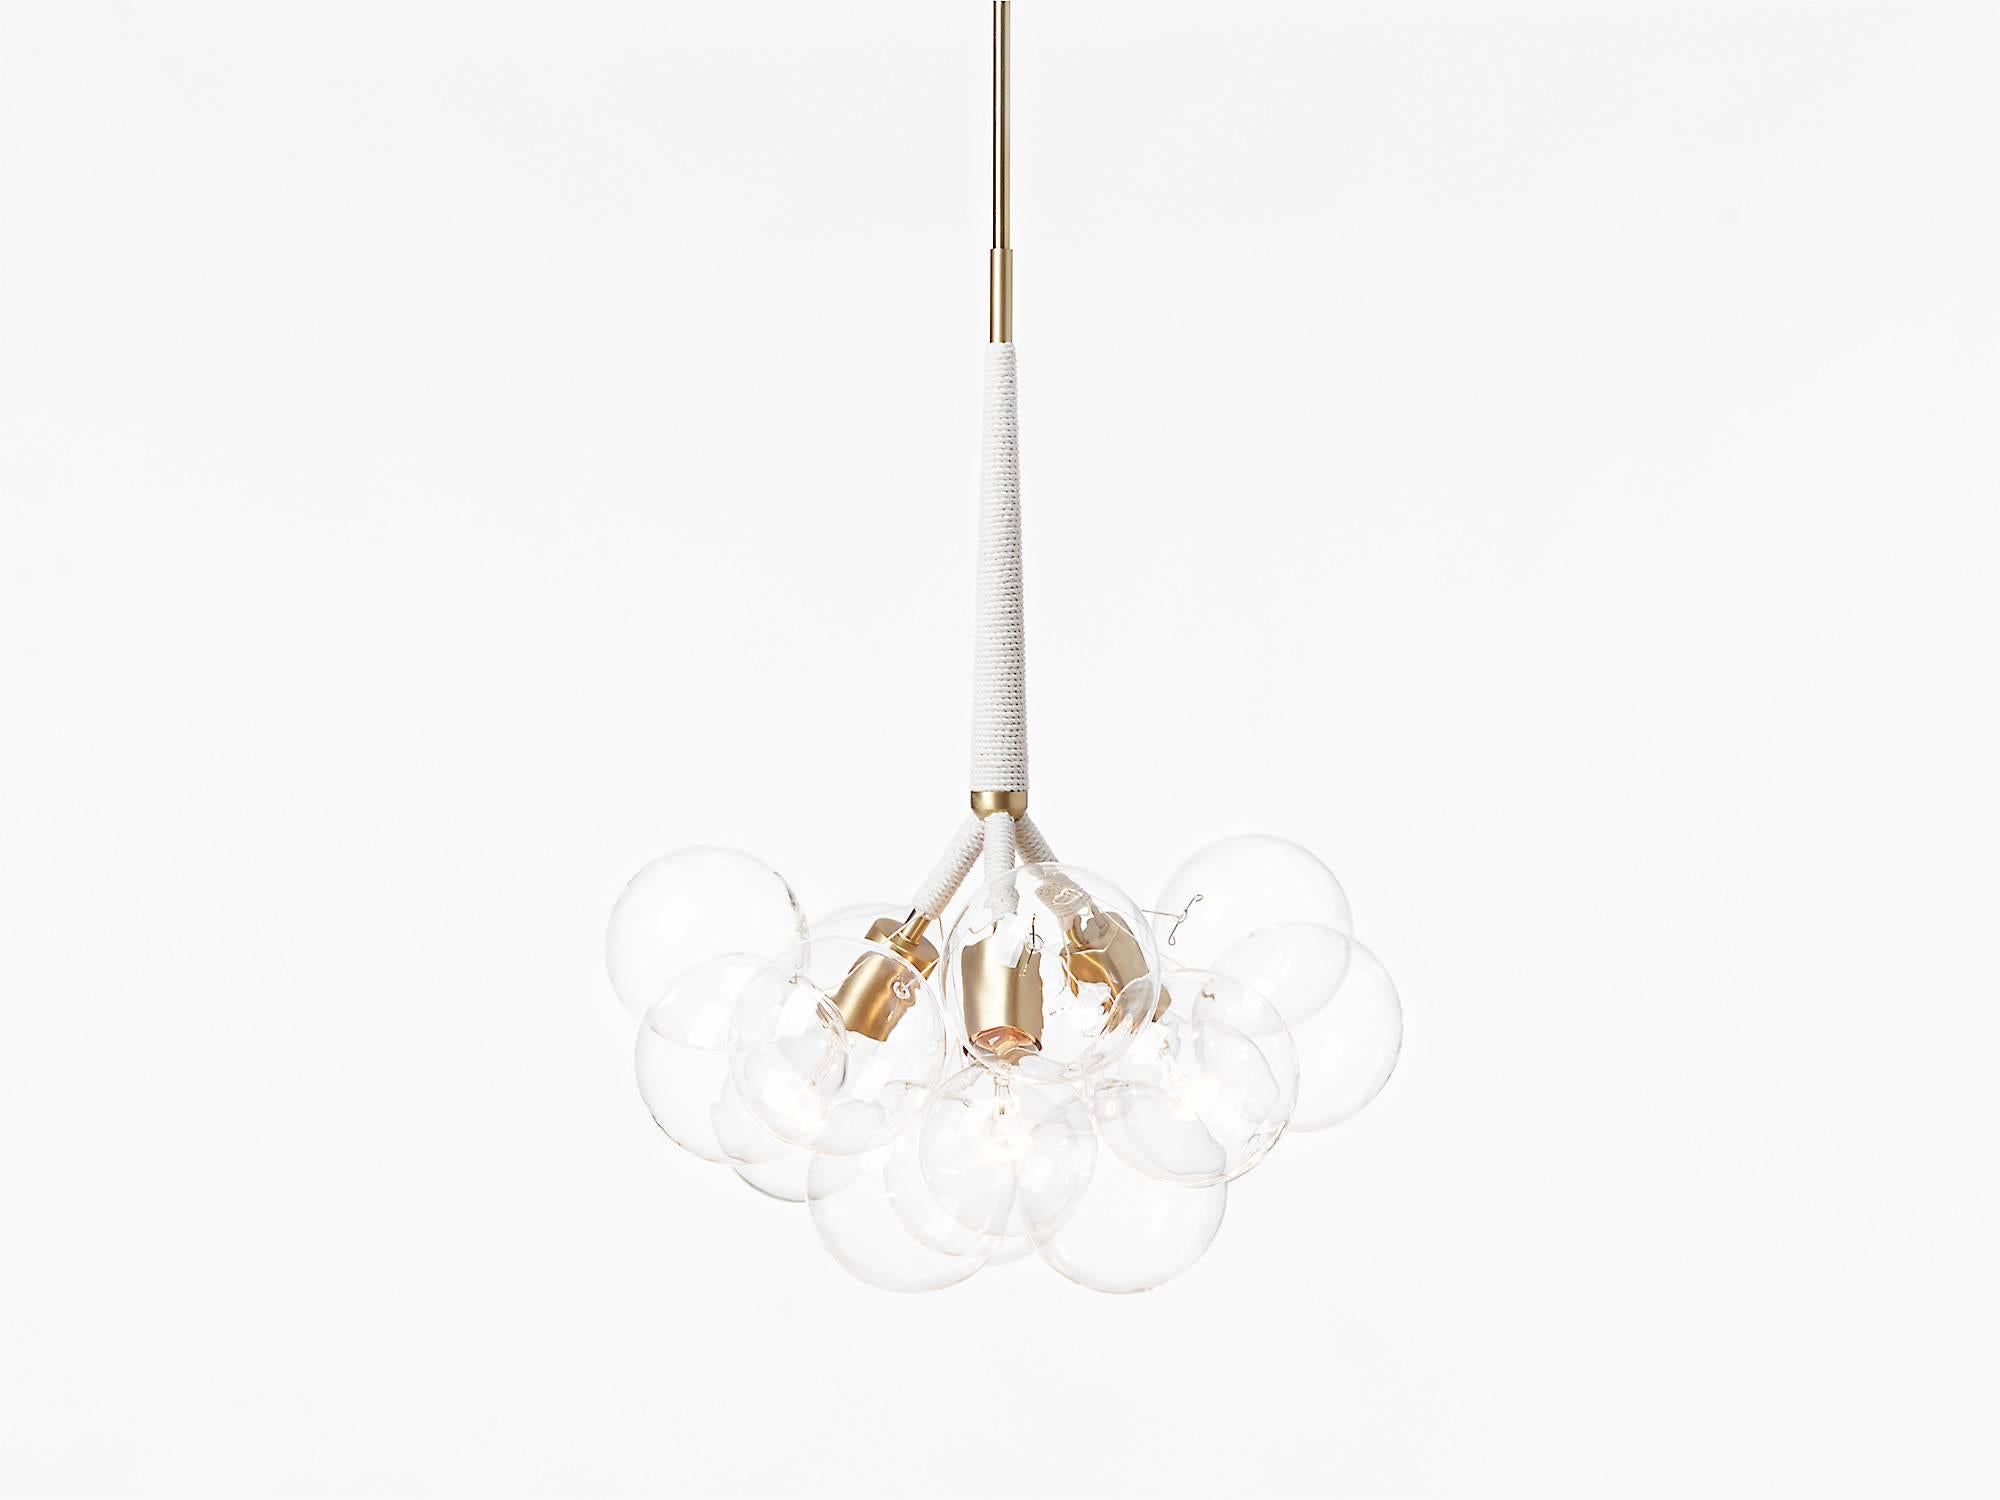 Ethereal and iconic, the Bubble chandelier is a modern re-interpretation of the crystal chandelier. Its luminous constellation of delicate glass globes adds beauty and depth to any interior environment.

Based on an original design first conceived